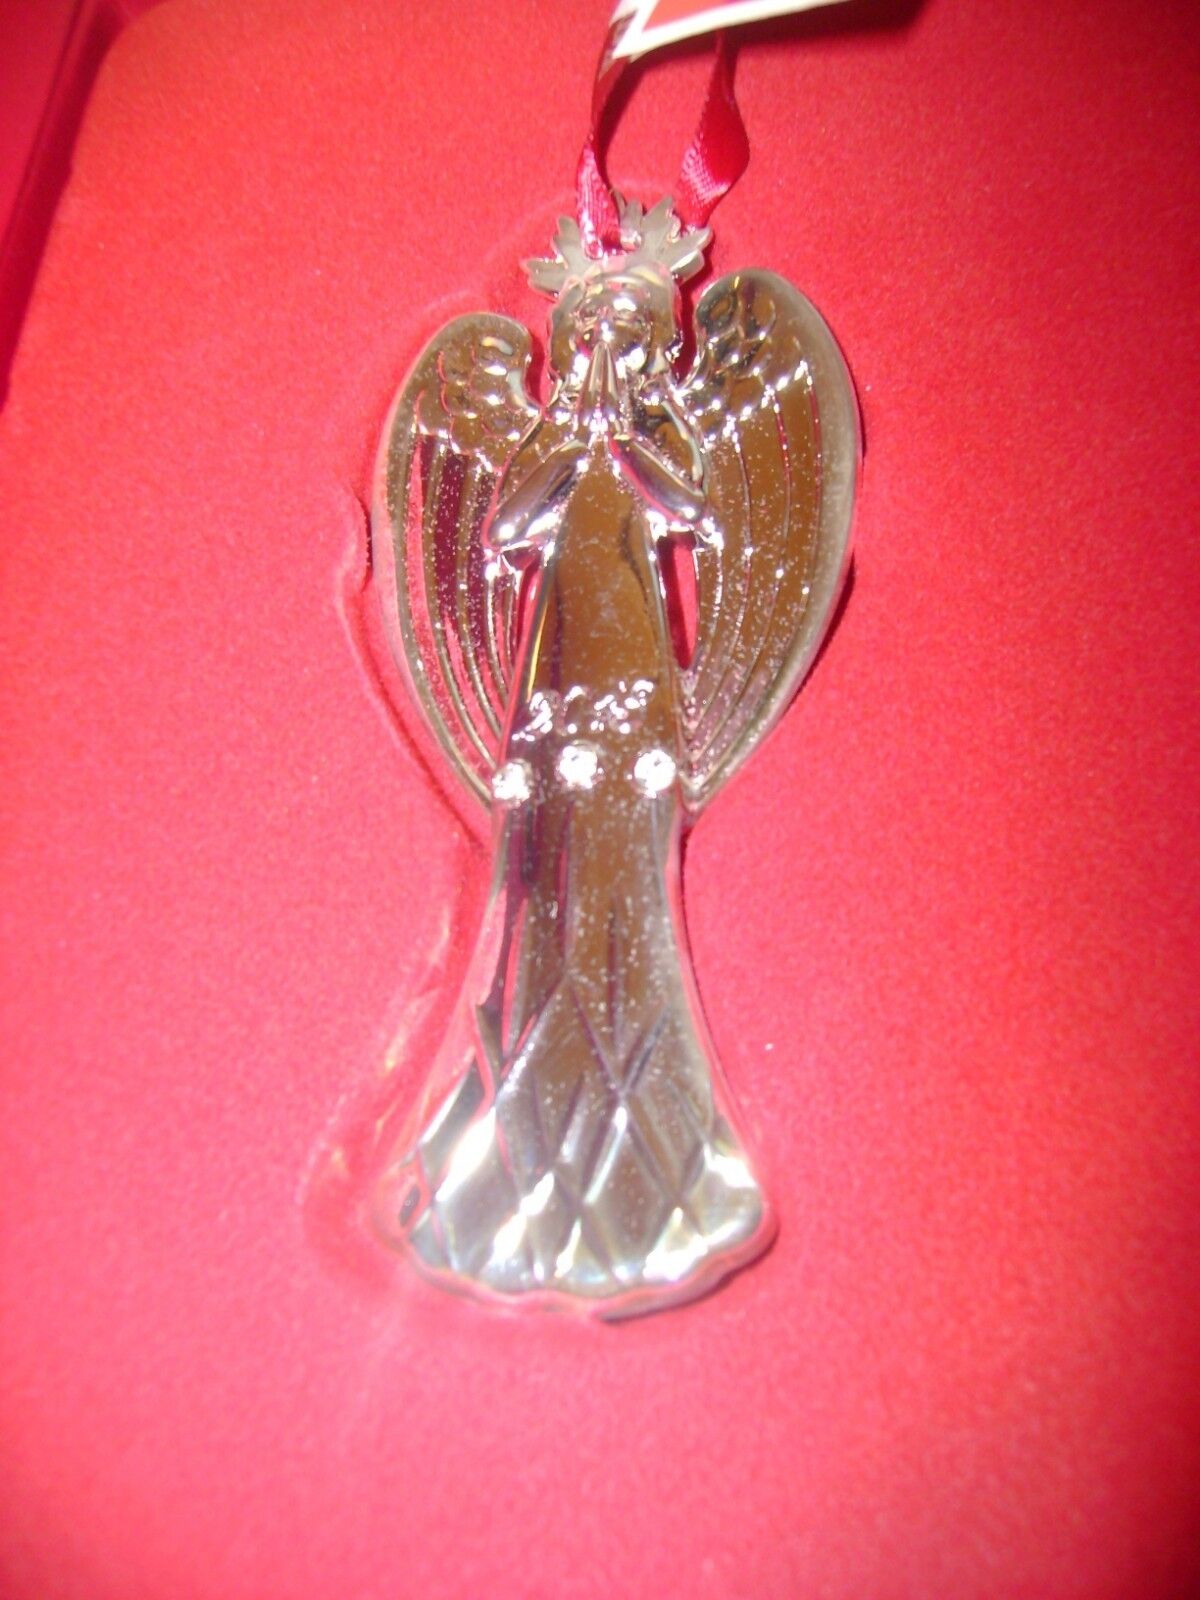 WATERFORD 2013 ANGEL ORNAMENT~~~SILVER PLATED ORNAMENT SERIES~DATED